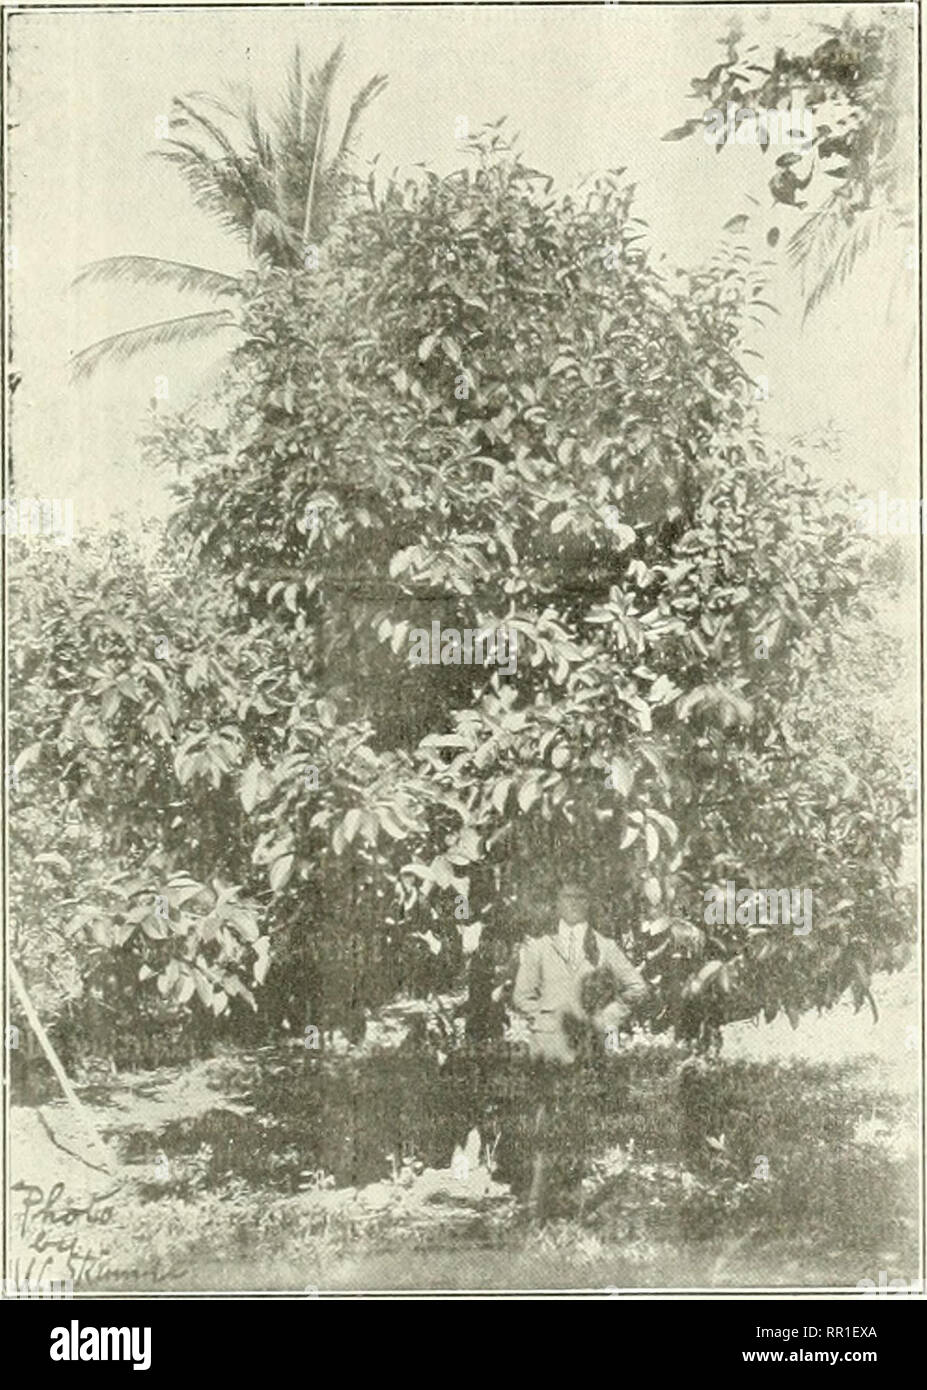 . Agricultural news. Agriculture -- West Indies; Plant diseases -- West Indies. Vol. VIII. No. 180. THE AGRICULTURAL NEWS. 85 MANGOSTEEN AT DOMINICA. So many notes on the characteristics and quality of the m;ir)g;osteen fruit have appeared in past issues of the Agrh-nhund Neu-s that little can be added to the itifcinuation already given in regard to thi.s interest- ing product. Plants (if till' iiiaiigo.stefn {Guiriiiin MdiKjoMuna) e.i.st in many of tlie West Indiai! islands, and the acconiiianying illustration (Fig. 1 &lt;) represents a finf,lifaltliy tree growing at St. Aronient, Dominica,  Stock Photo